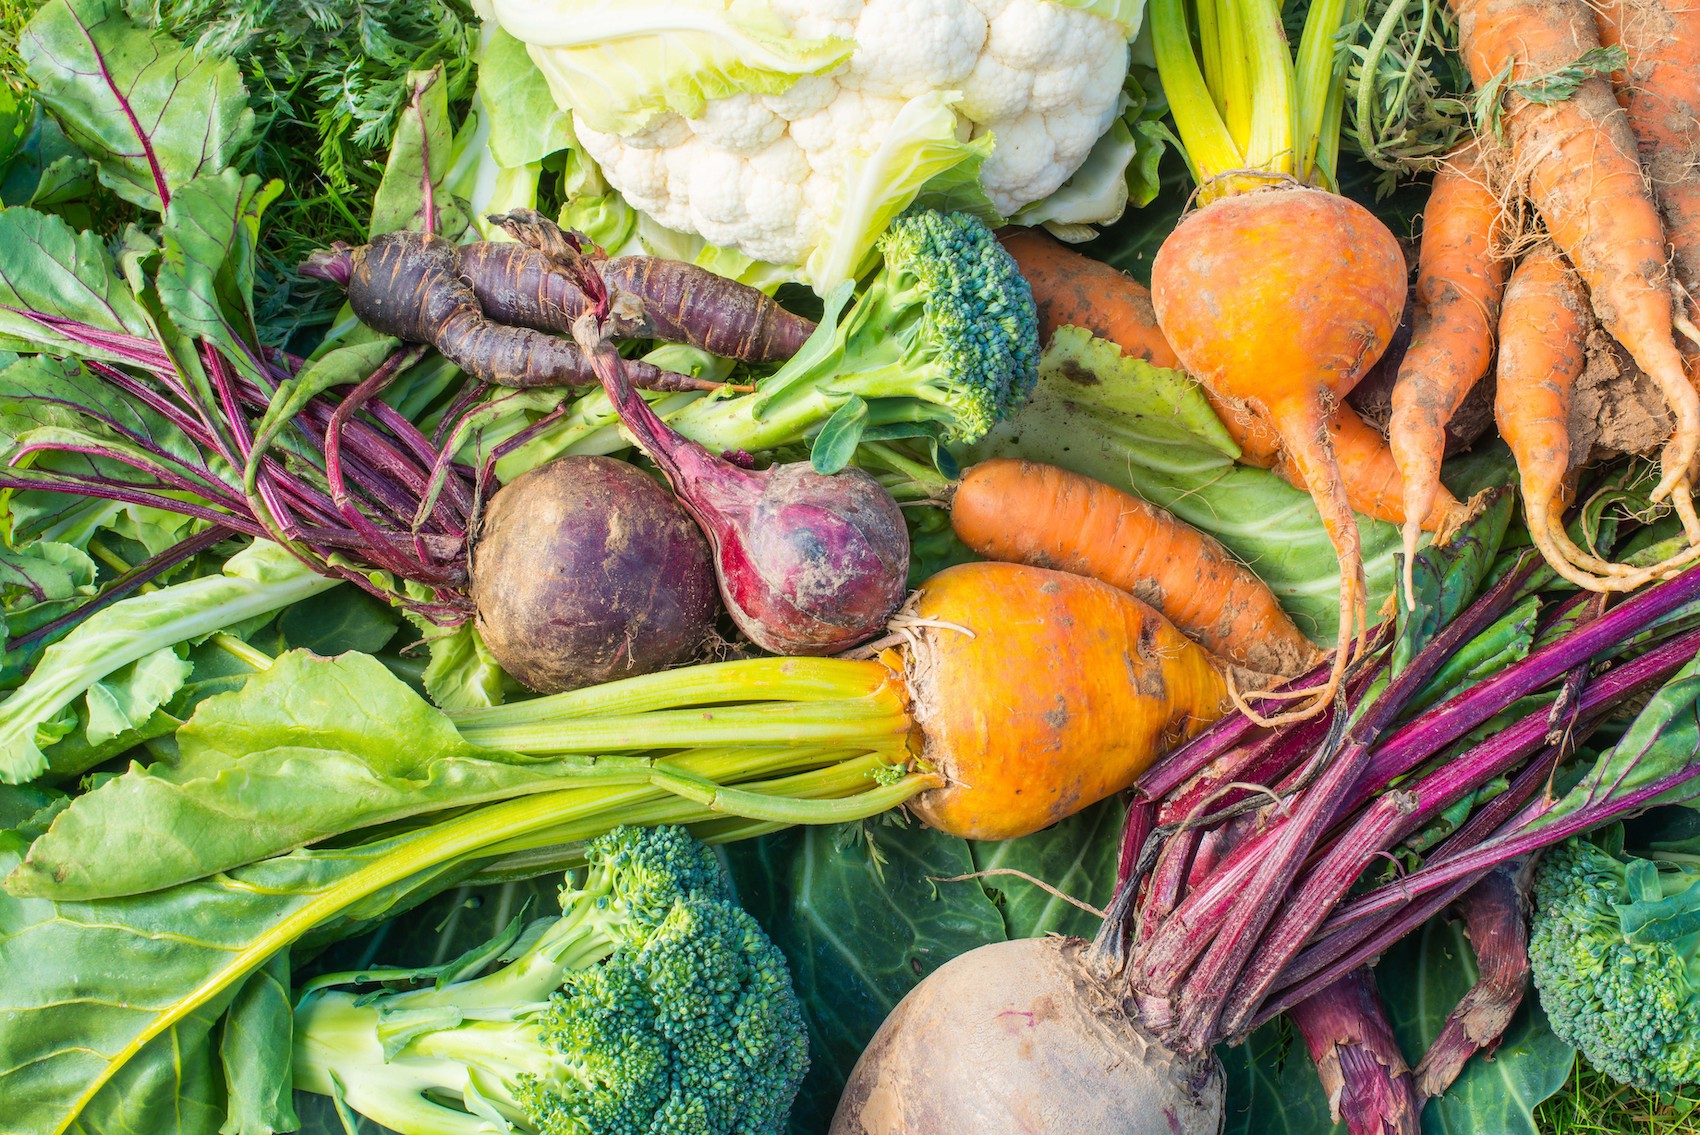 Food waste project to tackle surplus food on farms - Farmers Guide